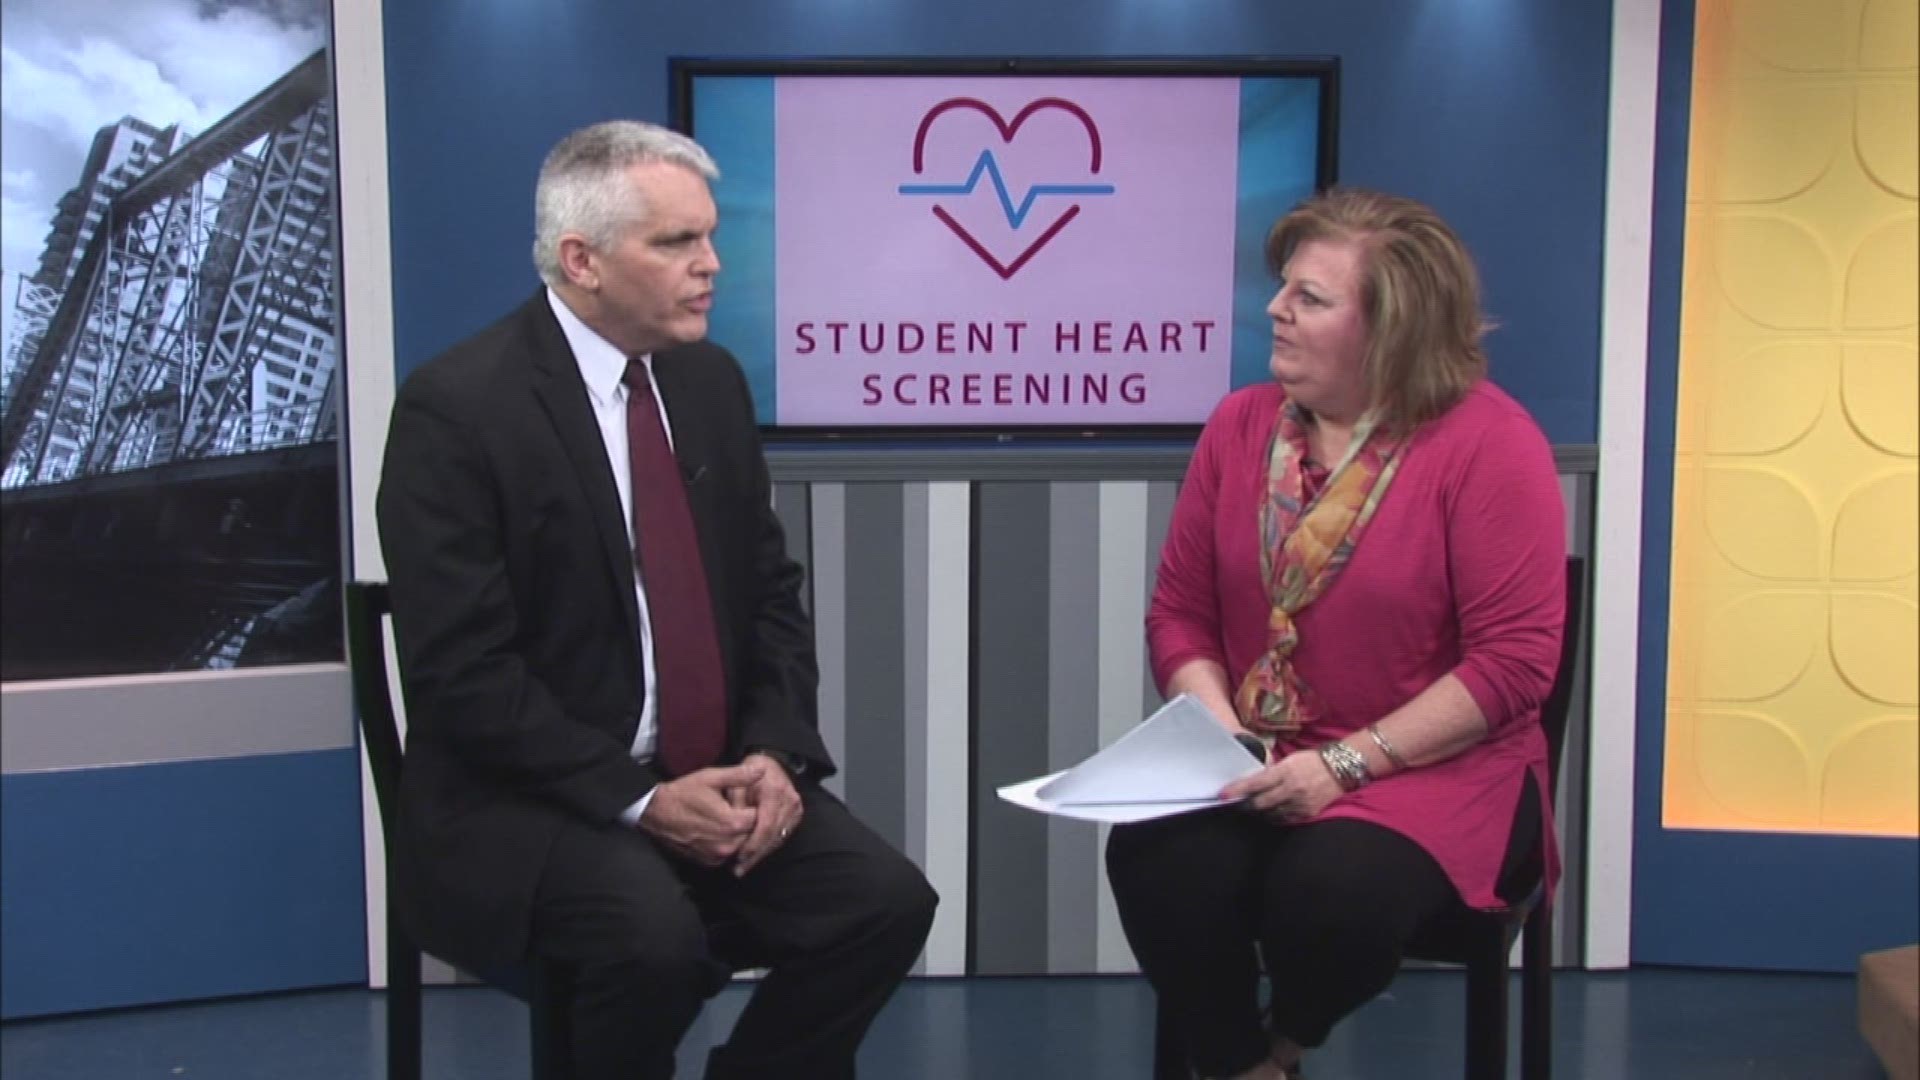 Mercy Health offers high school student heart screenings ... and here to tell us more about it is Dr. Daniel West ... From Mercy Health Physician Partners ... West Shore Cardiology.